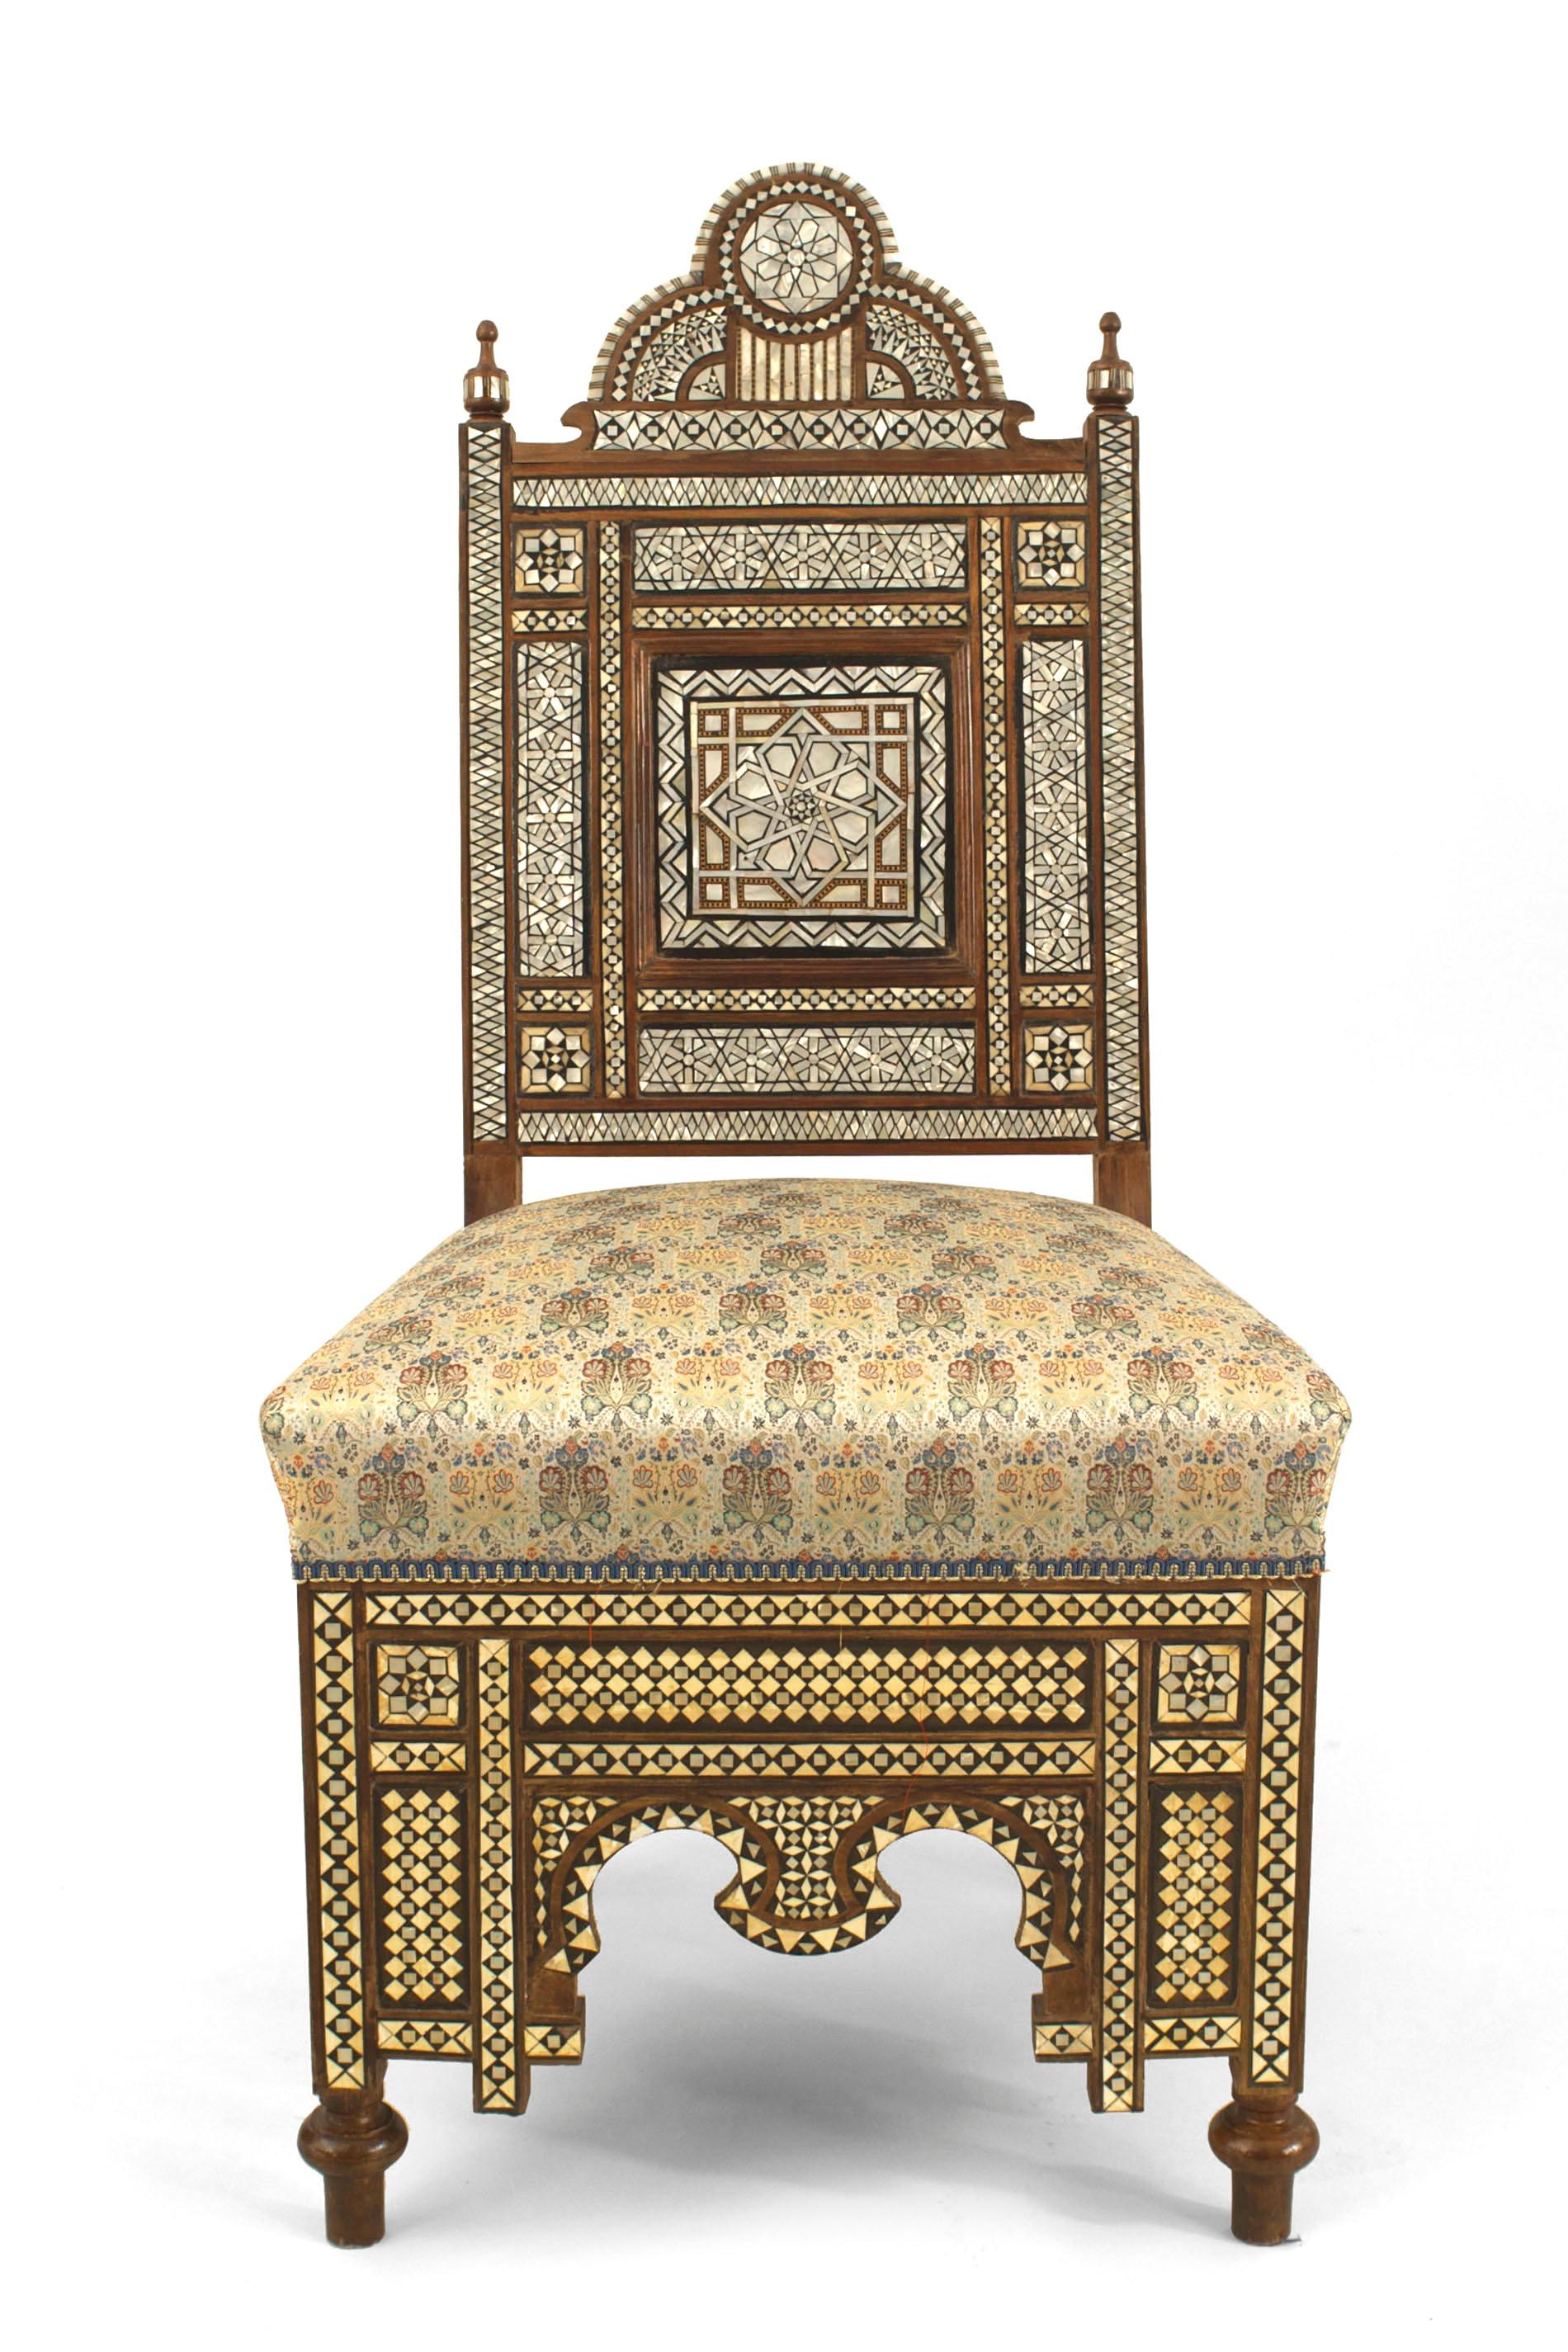 Pair of Middle Eastern Syrian (20th Cent) side chairs in walnut with inlaid mother of pearl and ebony with spindle & ball and finial details (matching 2 arms & settee 060219/CON62)
